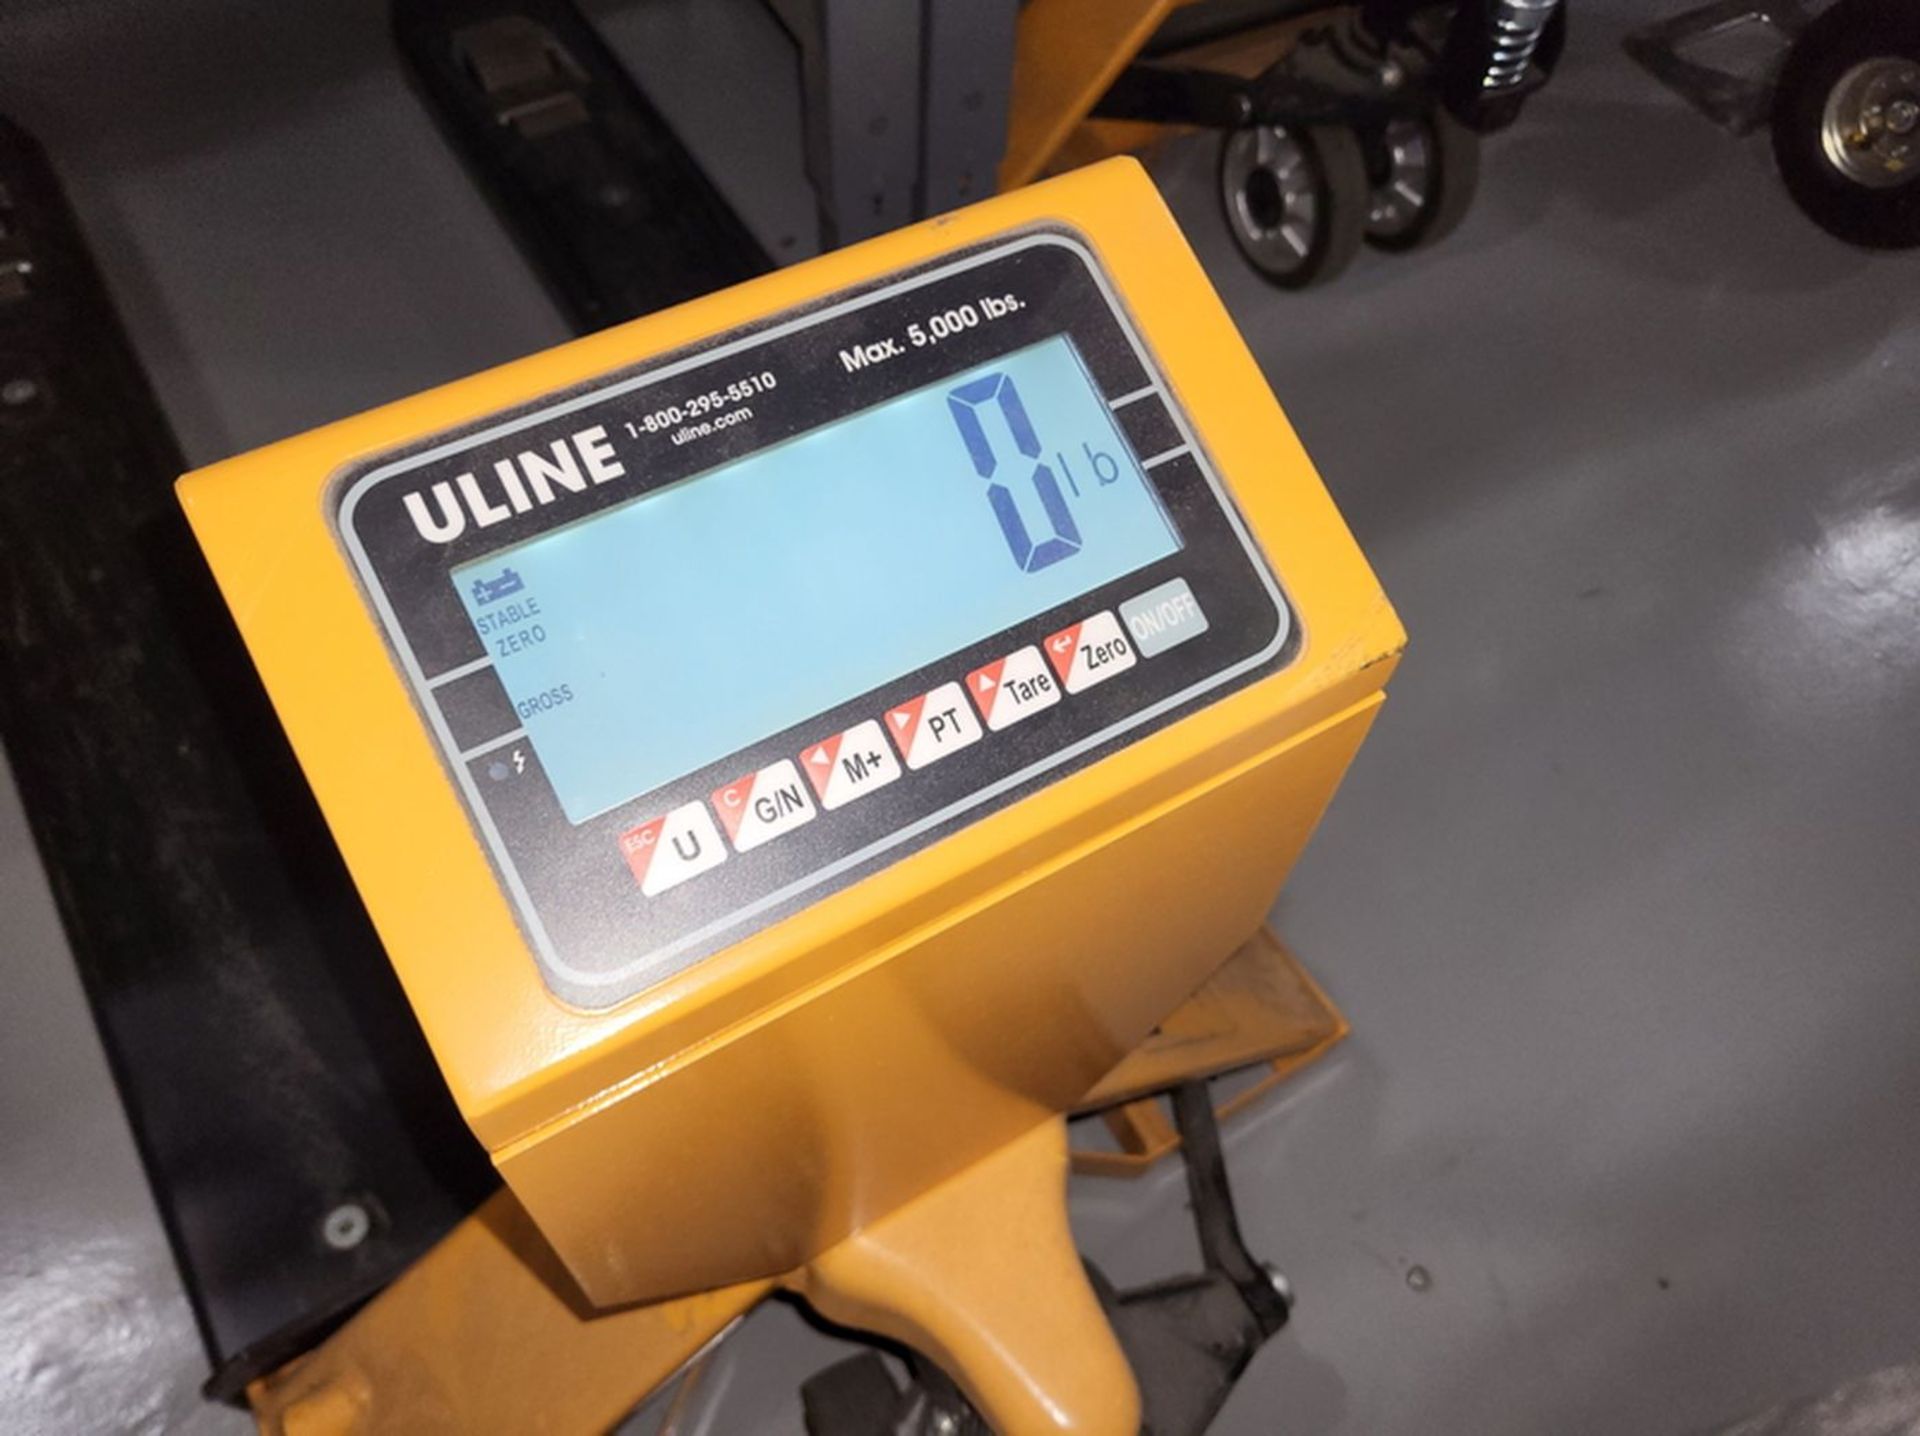 Uline 5,000 x 1-lb. Cap. Model H-1679 Hand Pallet Scale Truck, S/N: 106110035055; LCD Display, LB/ - Image 2 of 2